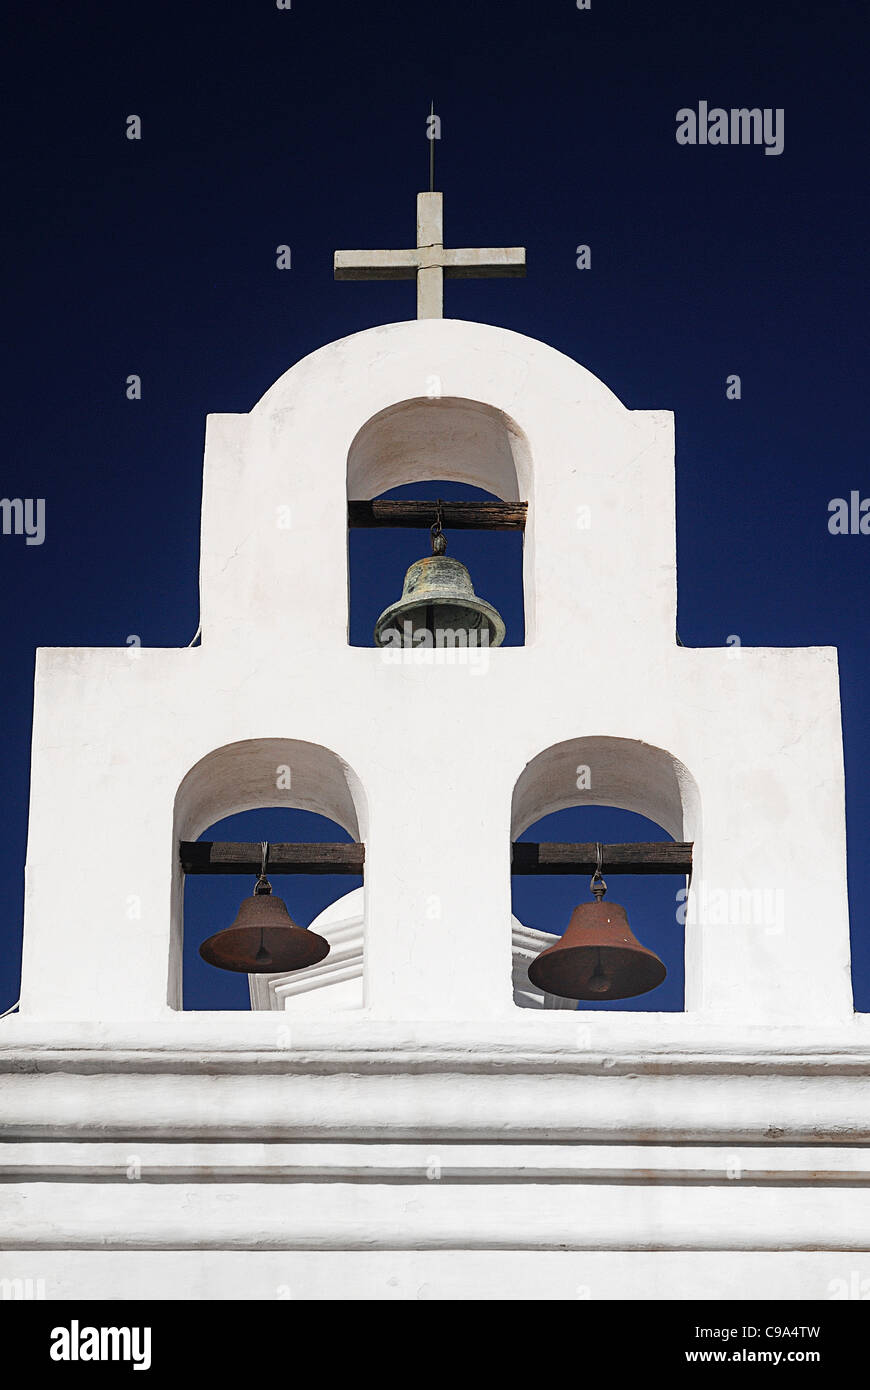 USA, Arizona, Tucson, Mission Church of San Xavier del Bac bells in white bell tower topped with cross. Stock Photo